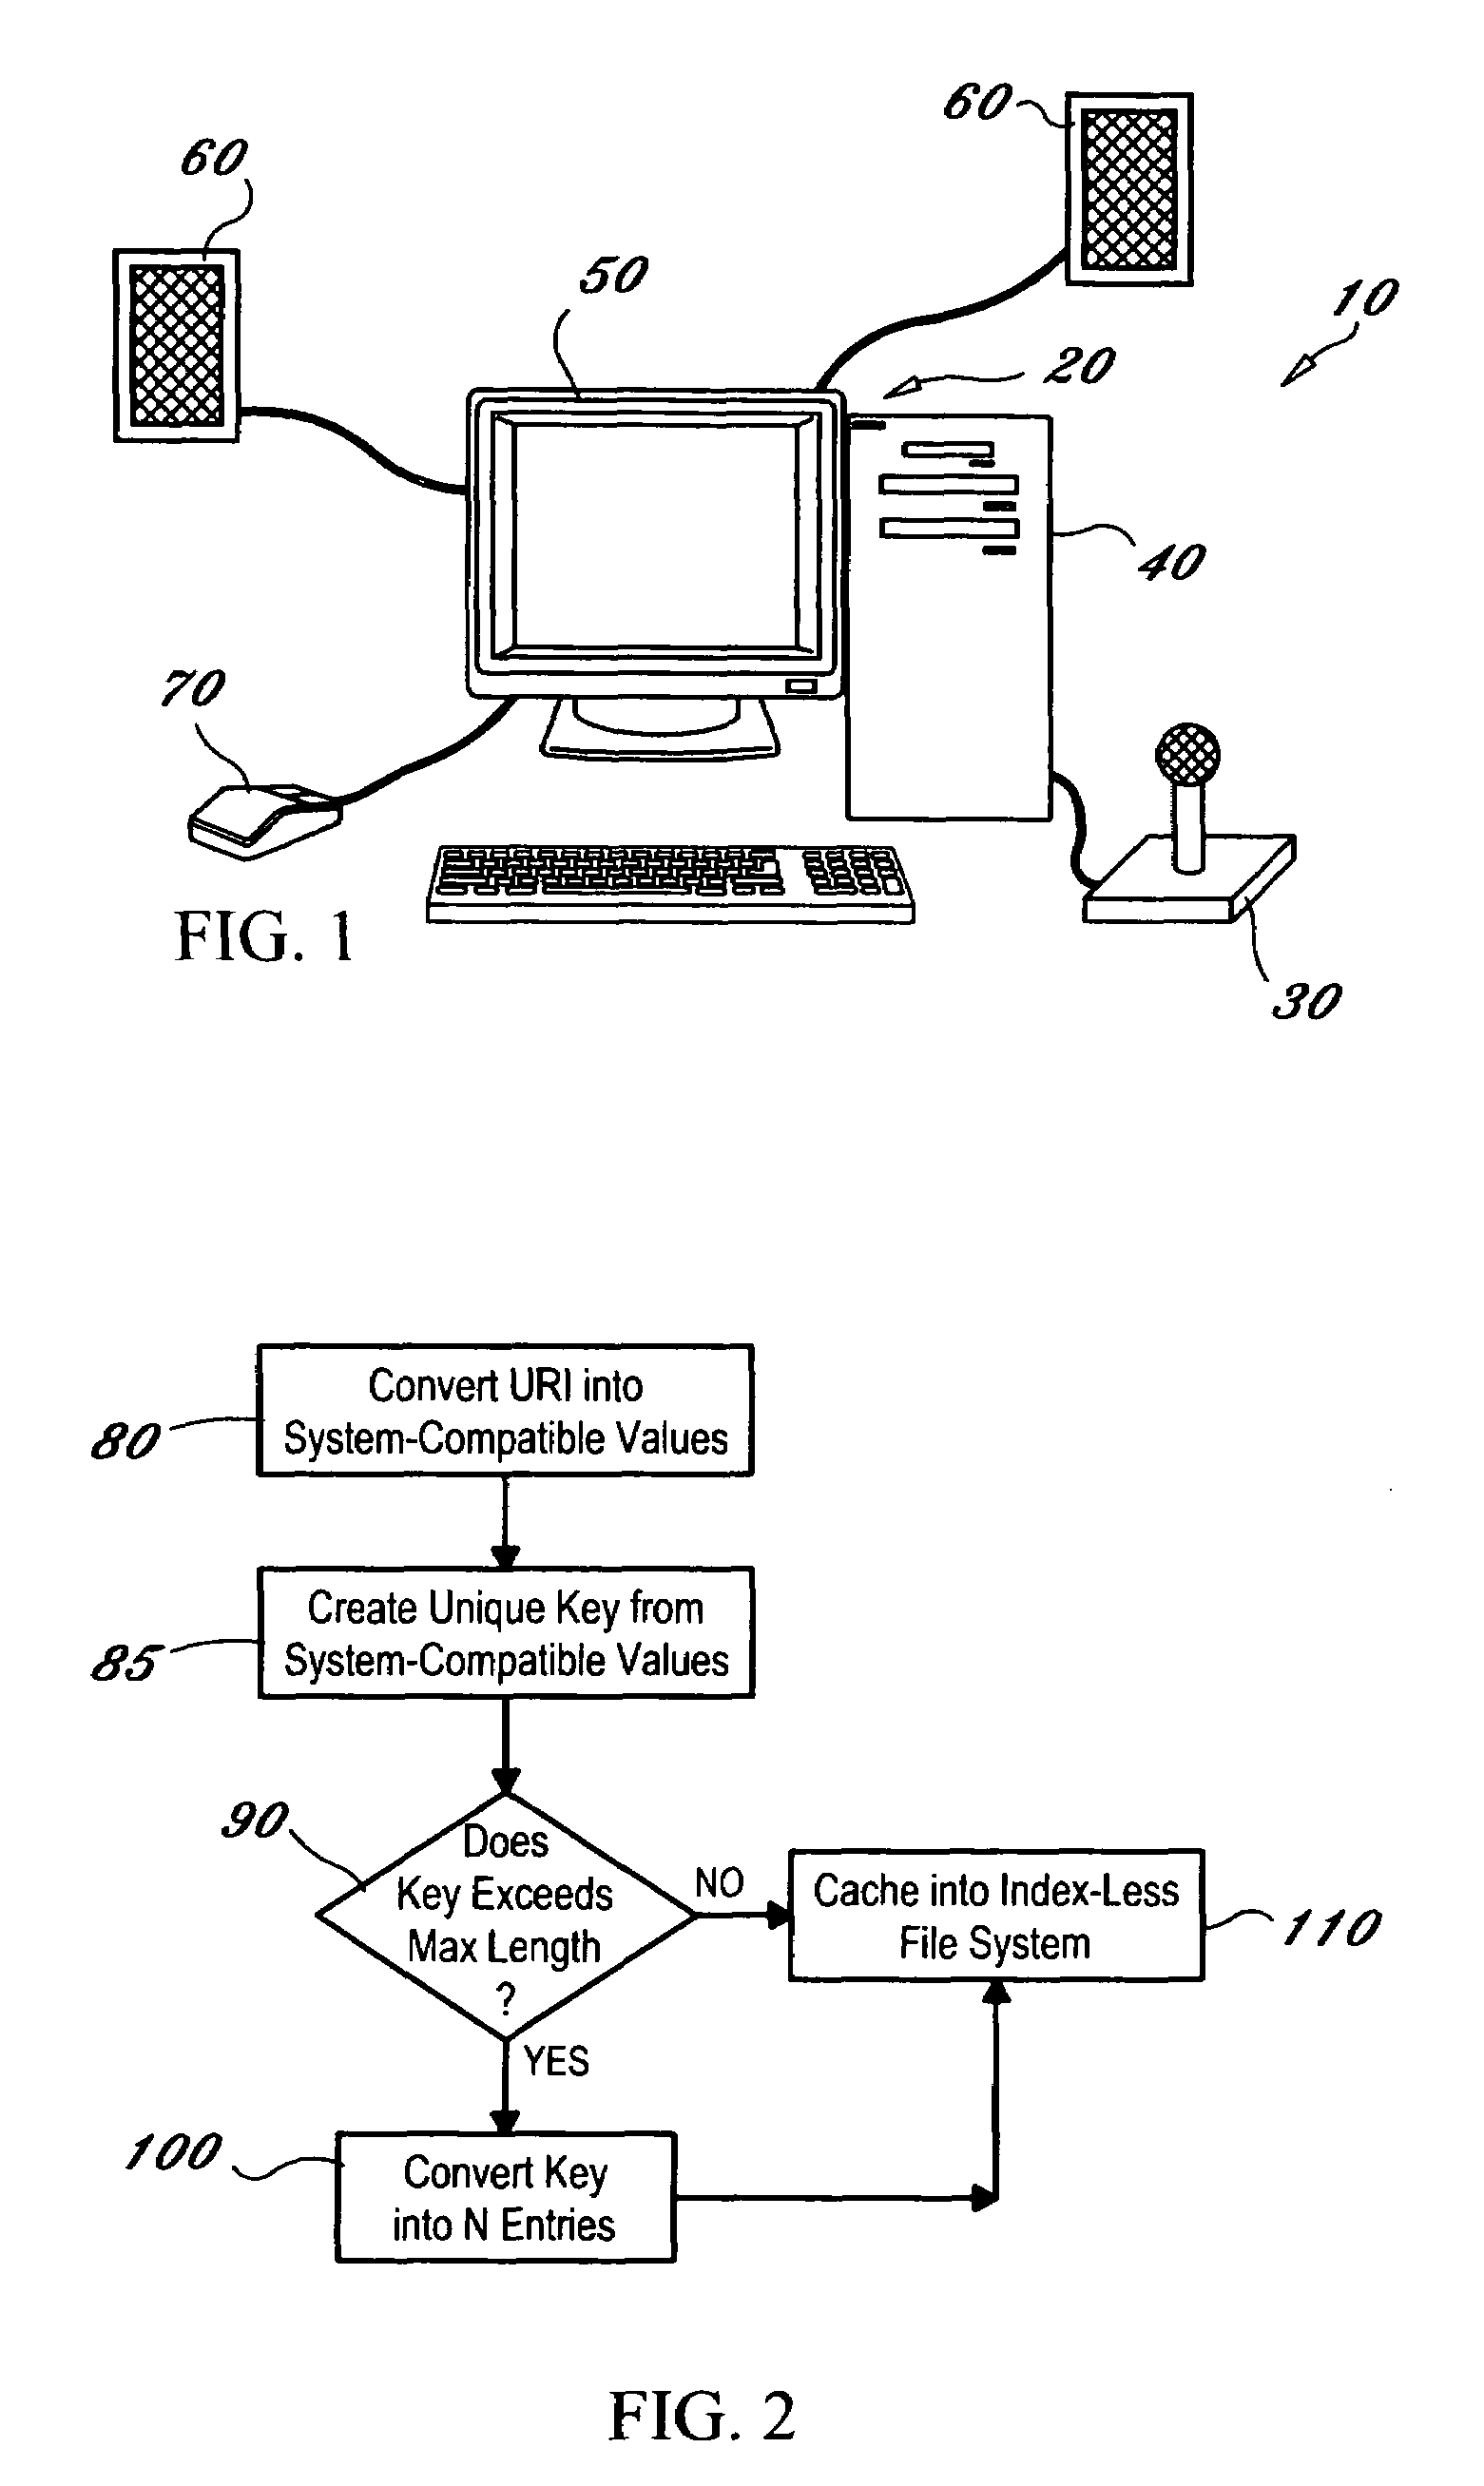 System and method for generating a unique, file system independent key from a URI (universal resource indentifier) for use in an index-less voicexml browser caching mechanism